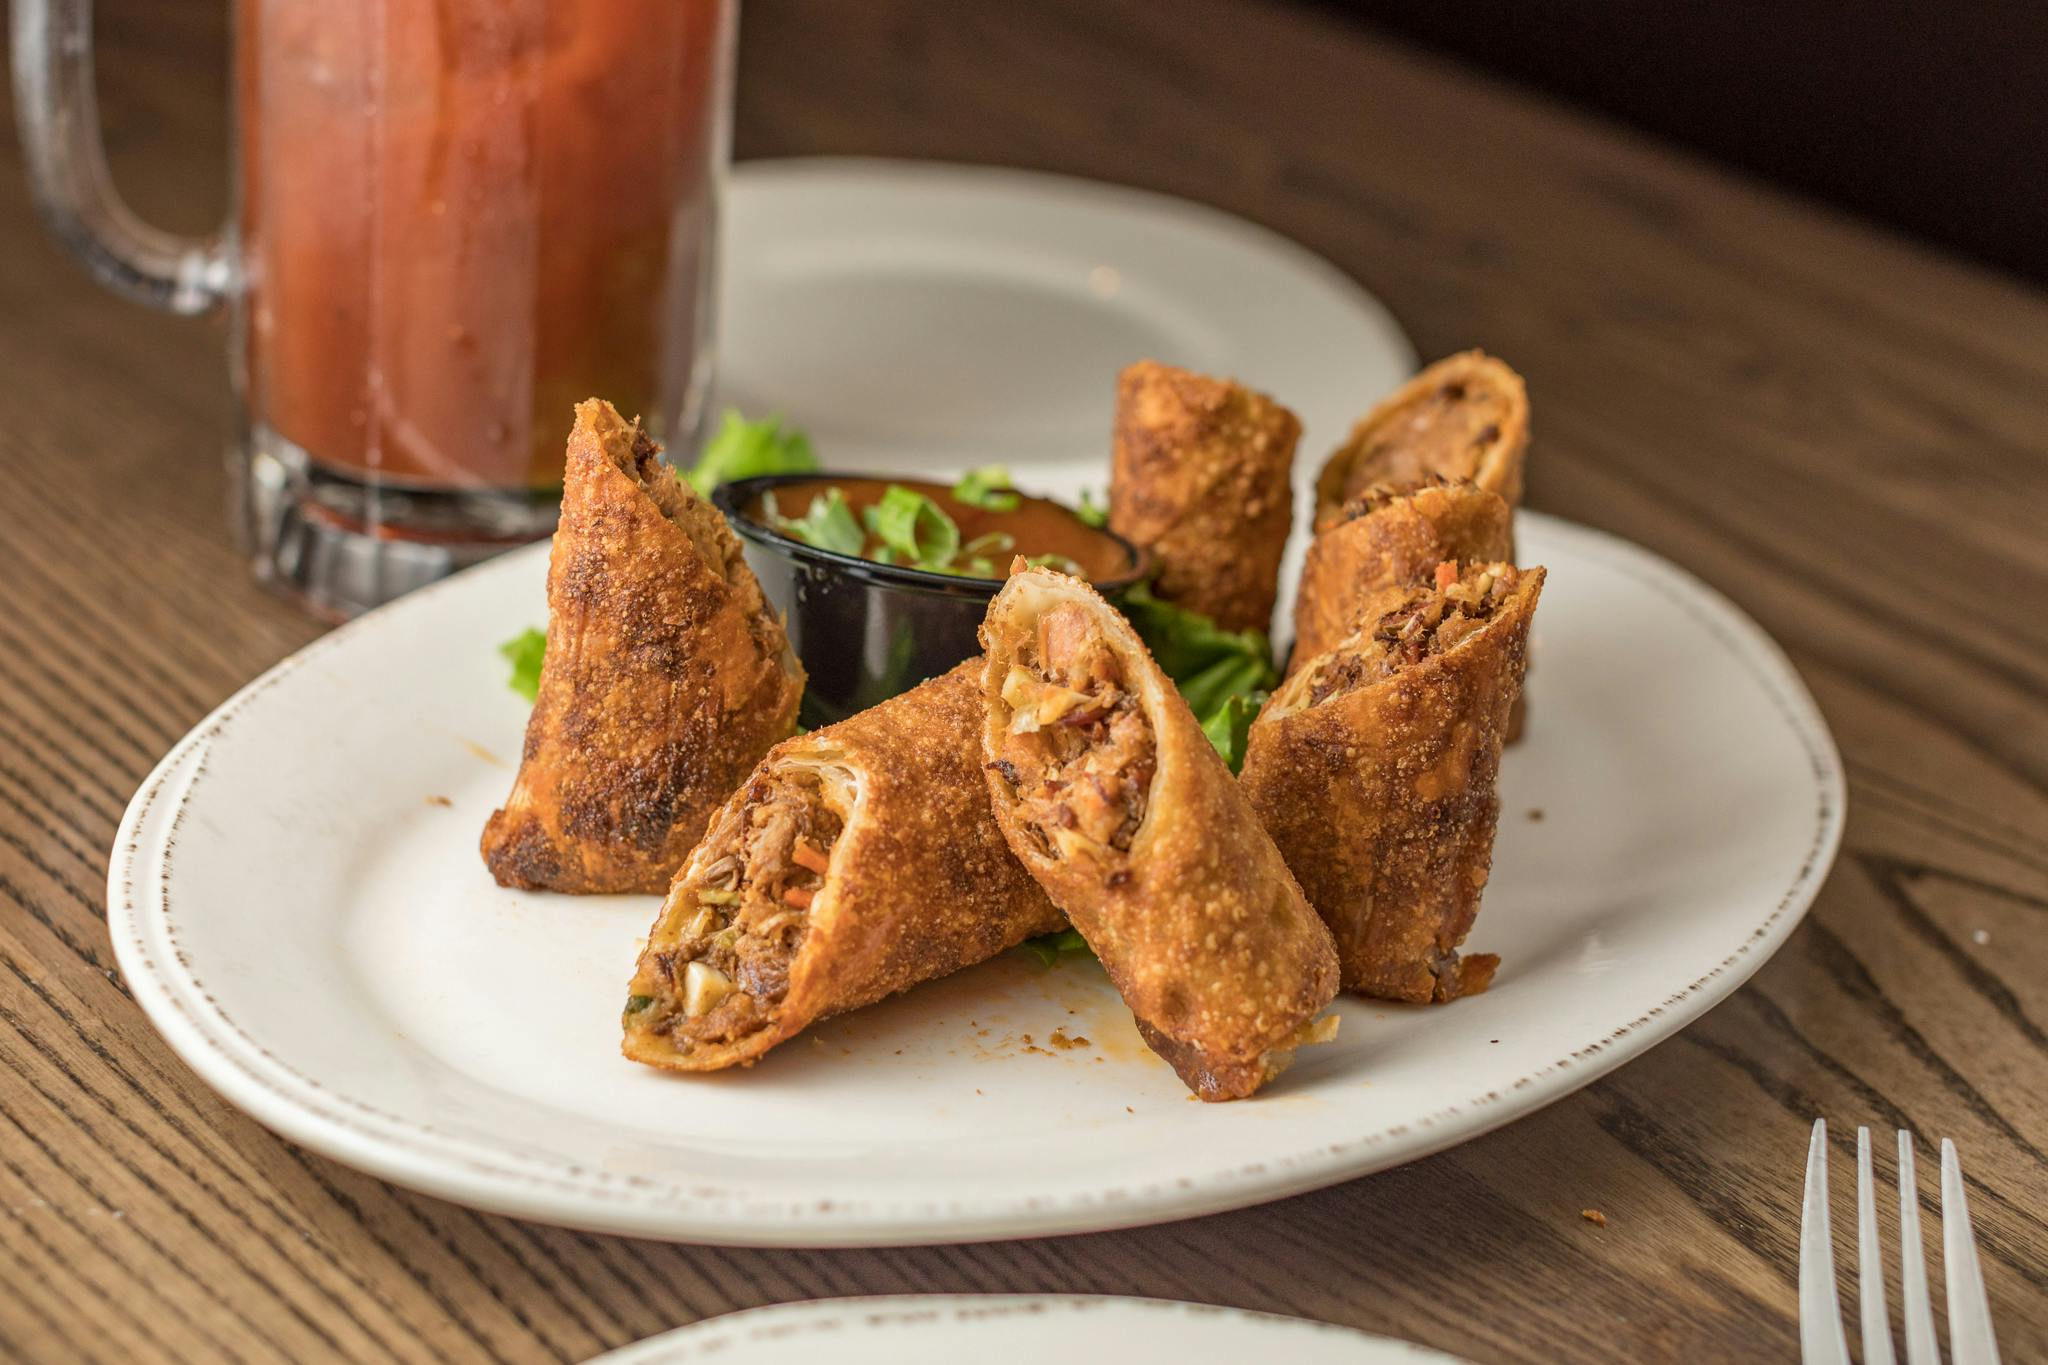 Texas Egg Rolls from Grizzly's Wood-Fired Grill in Eau Claire, WI